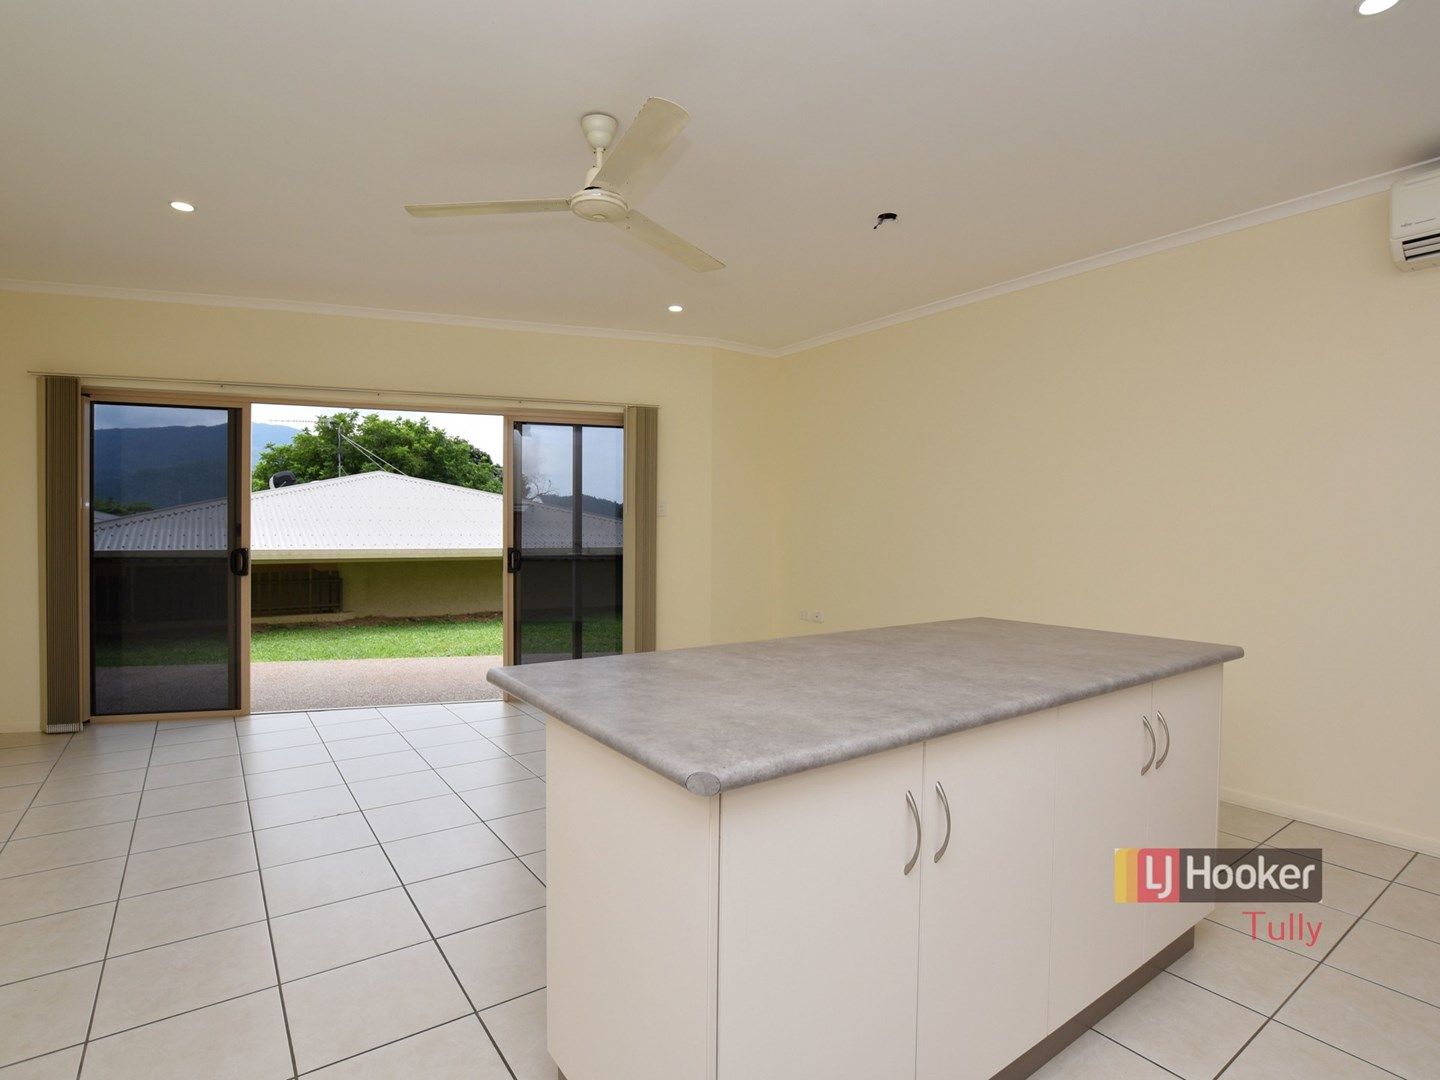 2/11 McQuillen St, Tully QLD 4854, Image 2